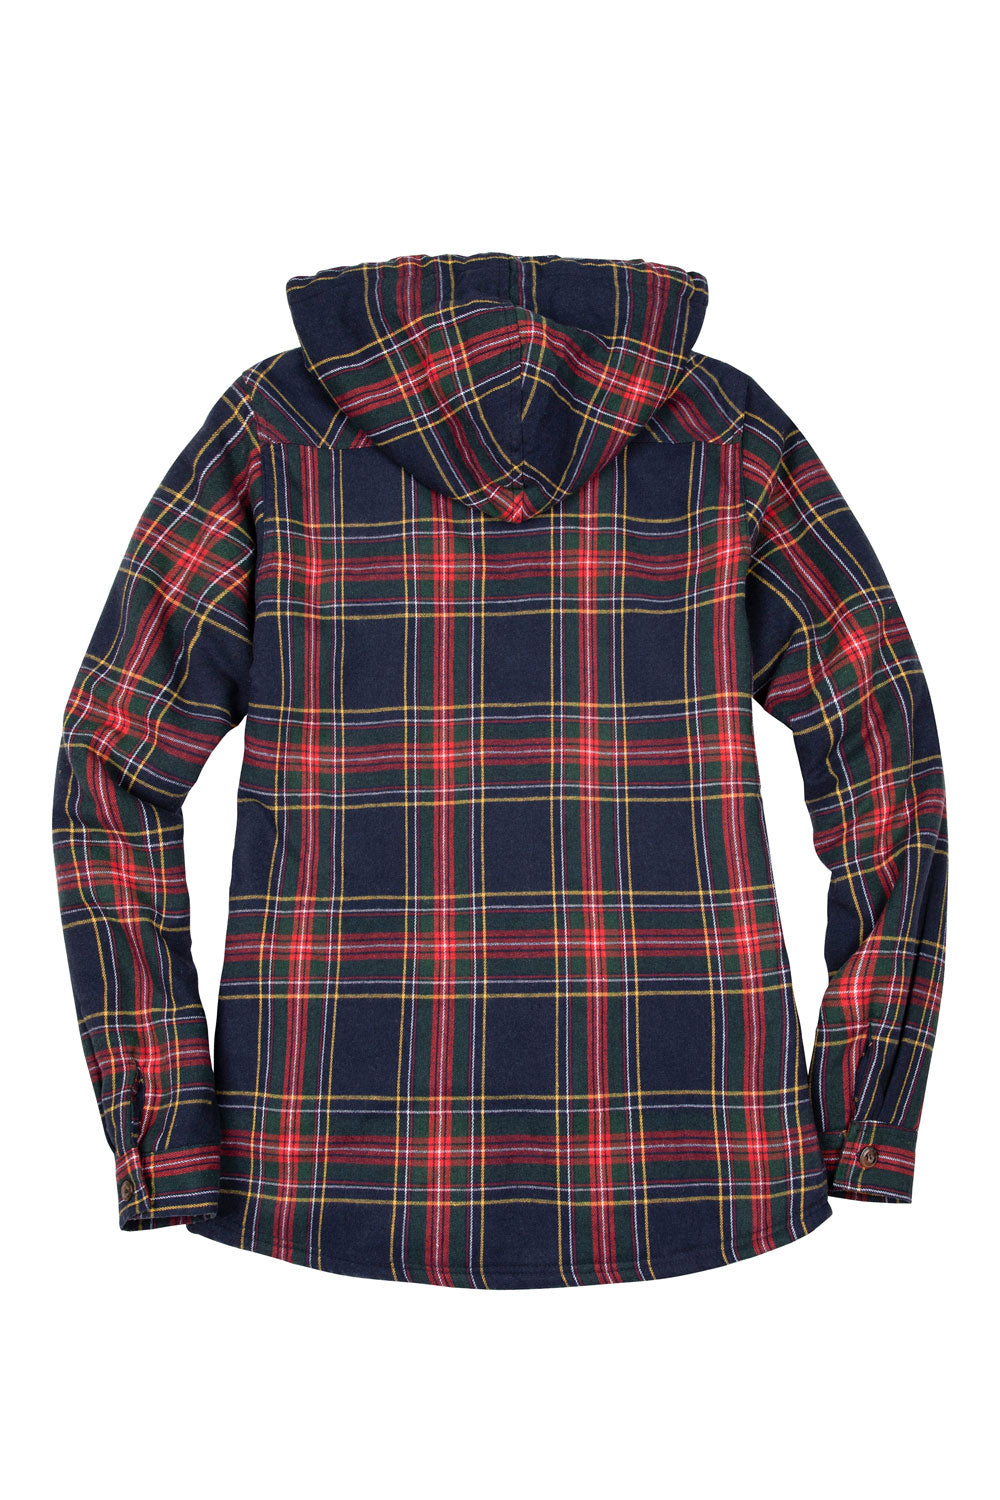 Women's Sherpa-Lined Flannel Jacket Full Zip Up Hooded Plaid Shirt ...